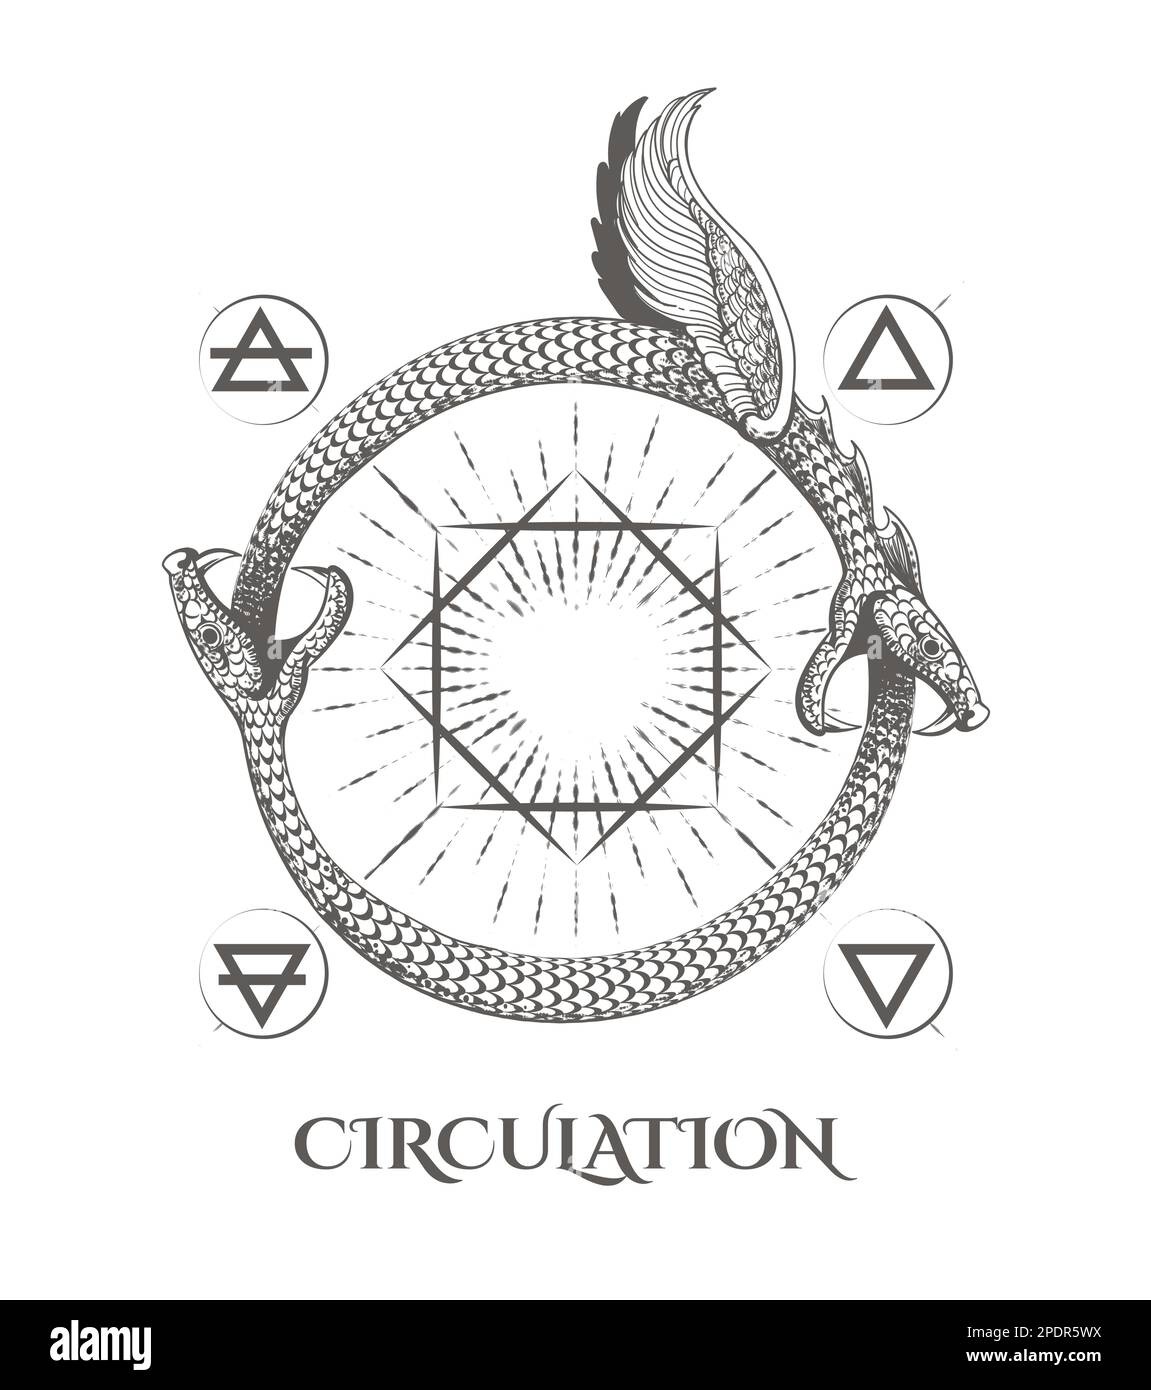 Two Ouroboros Snakes Eat Their Tails and Nature Elements symbol Esoteric Circulation Concept isolated on white. Vector illustration. Stock Vector